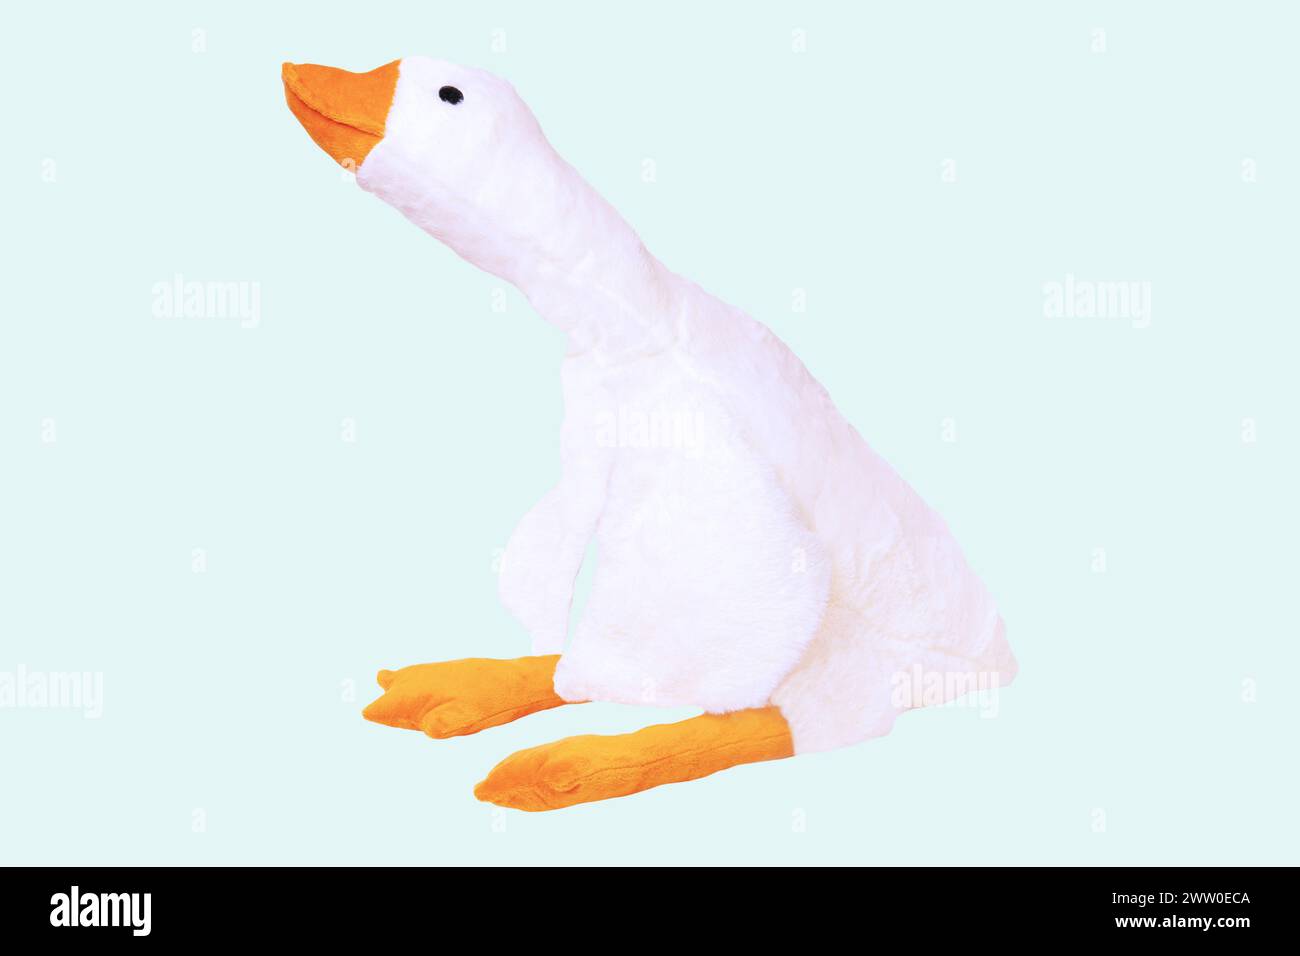 Childrens toy stuffed animals. Soft white plush toy duck for kids isolated on a light blue background. Duck teddy toy. White duck for playing. Stock Photo